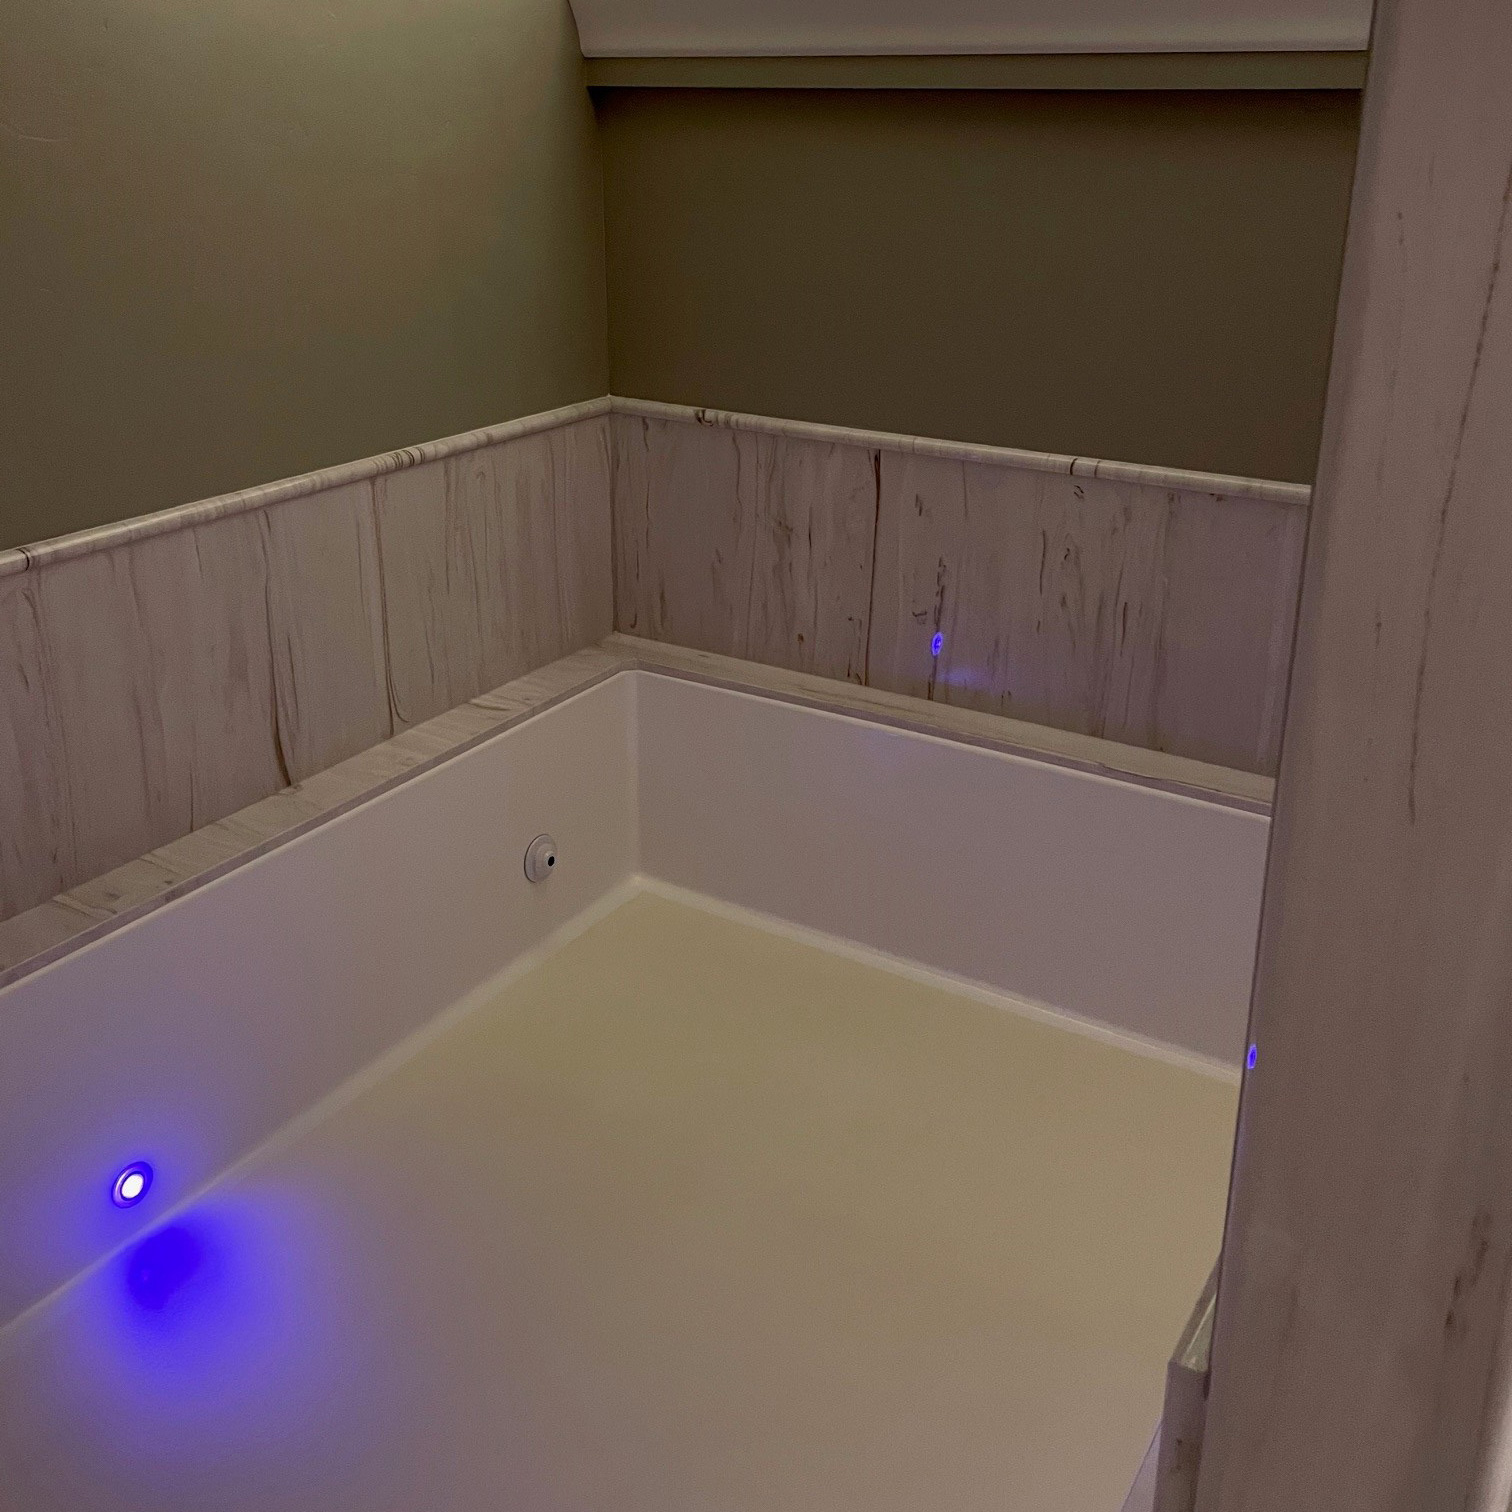 The Pillar Cabin Float room features an open, pool-like tub, behind a secondary wall from the rest of the room for flotation therapy